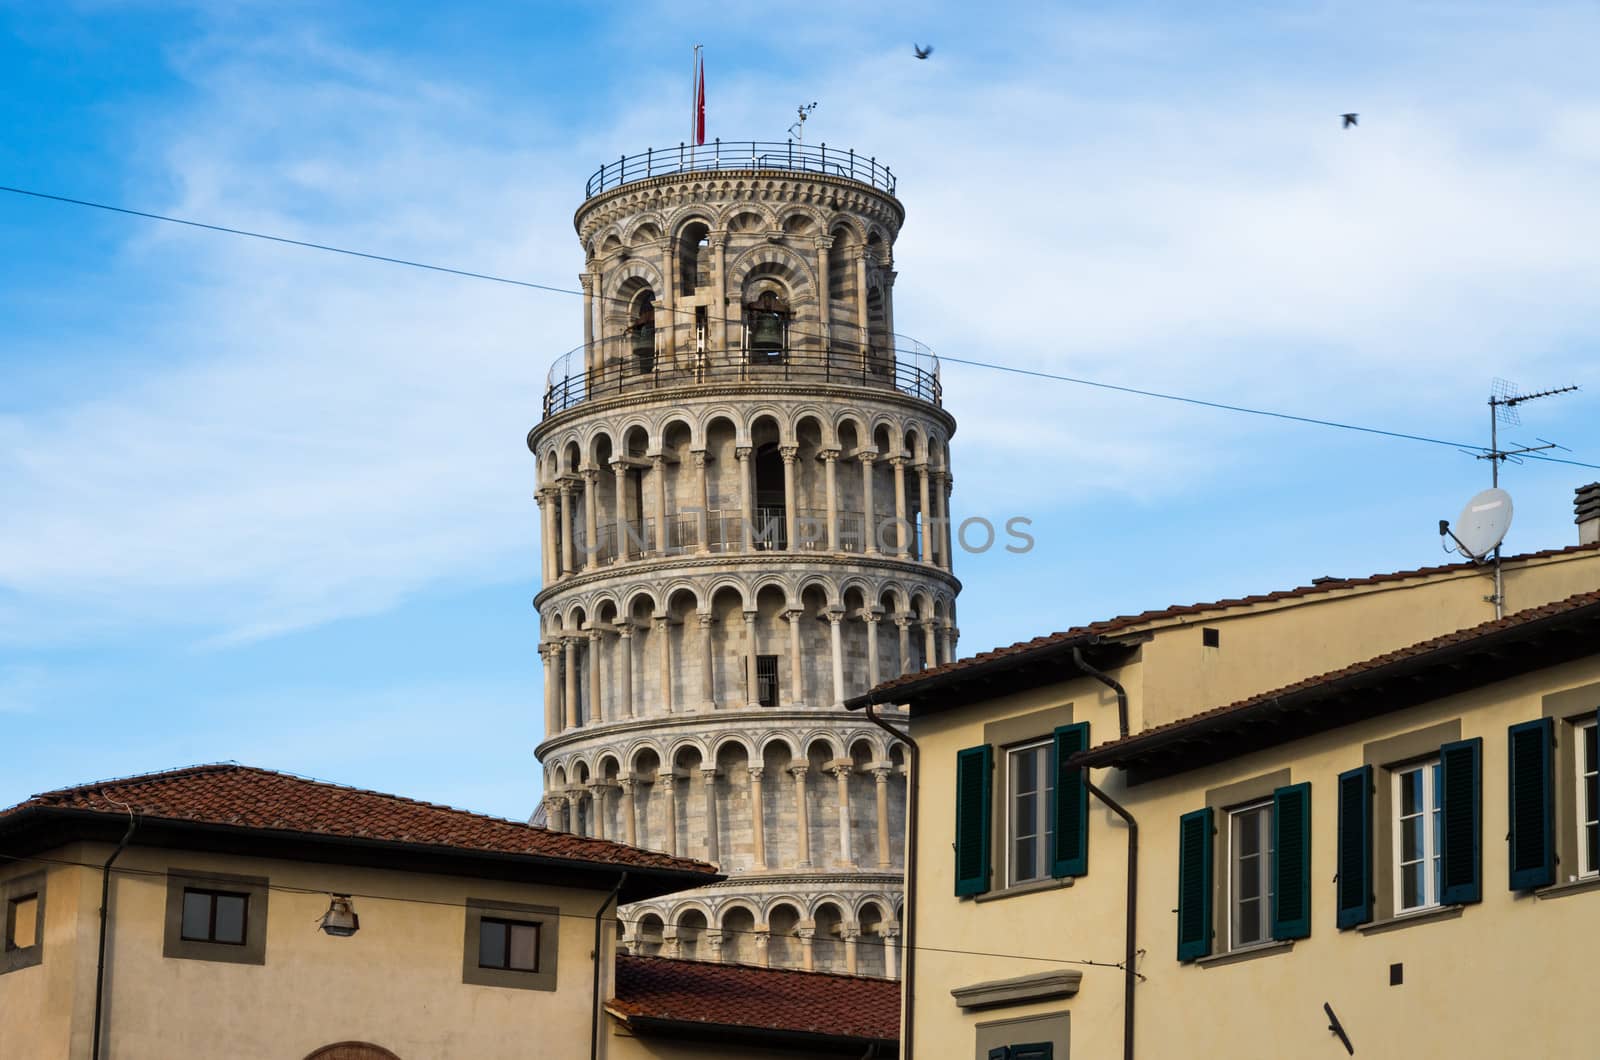 The leaning tower by ellepistock